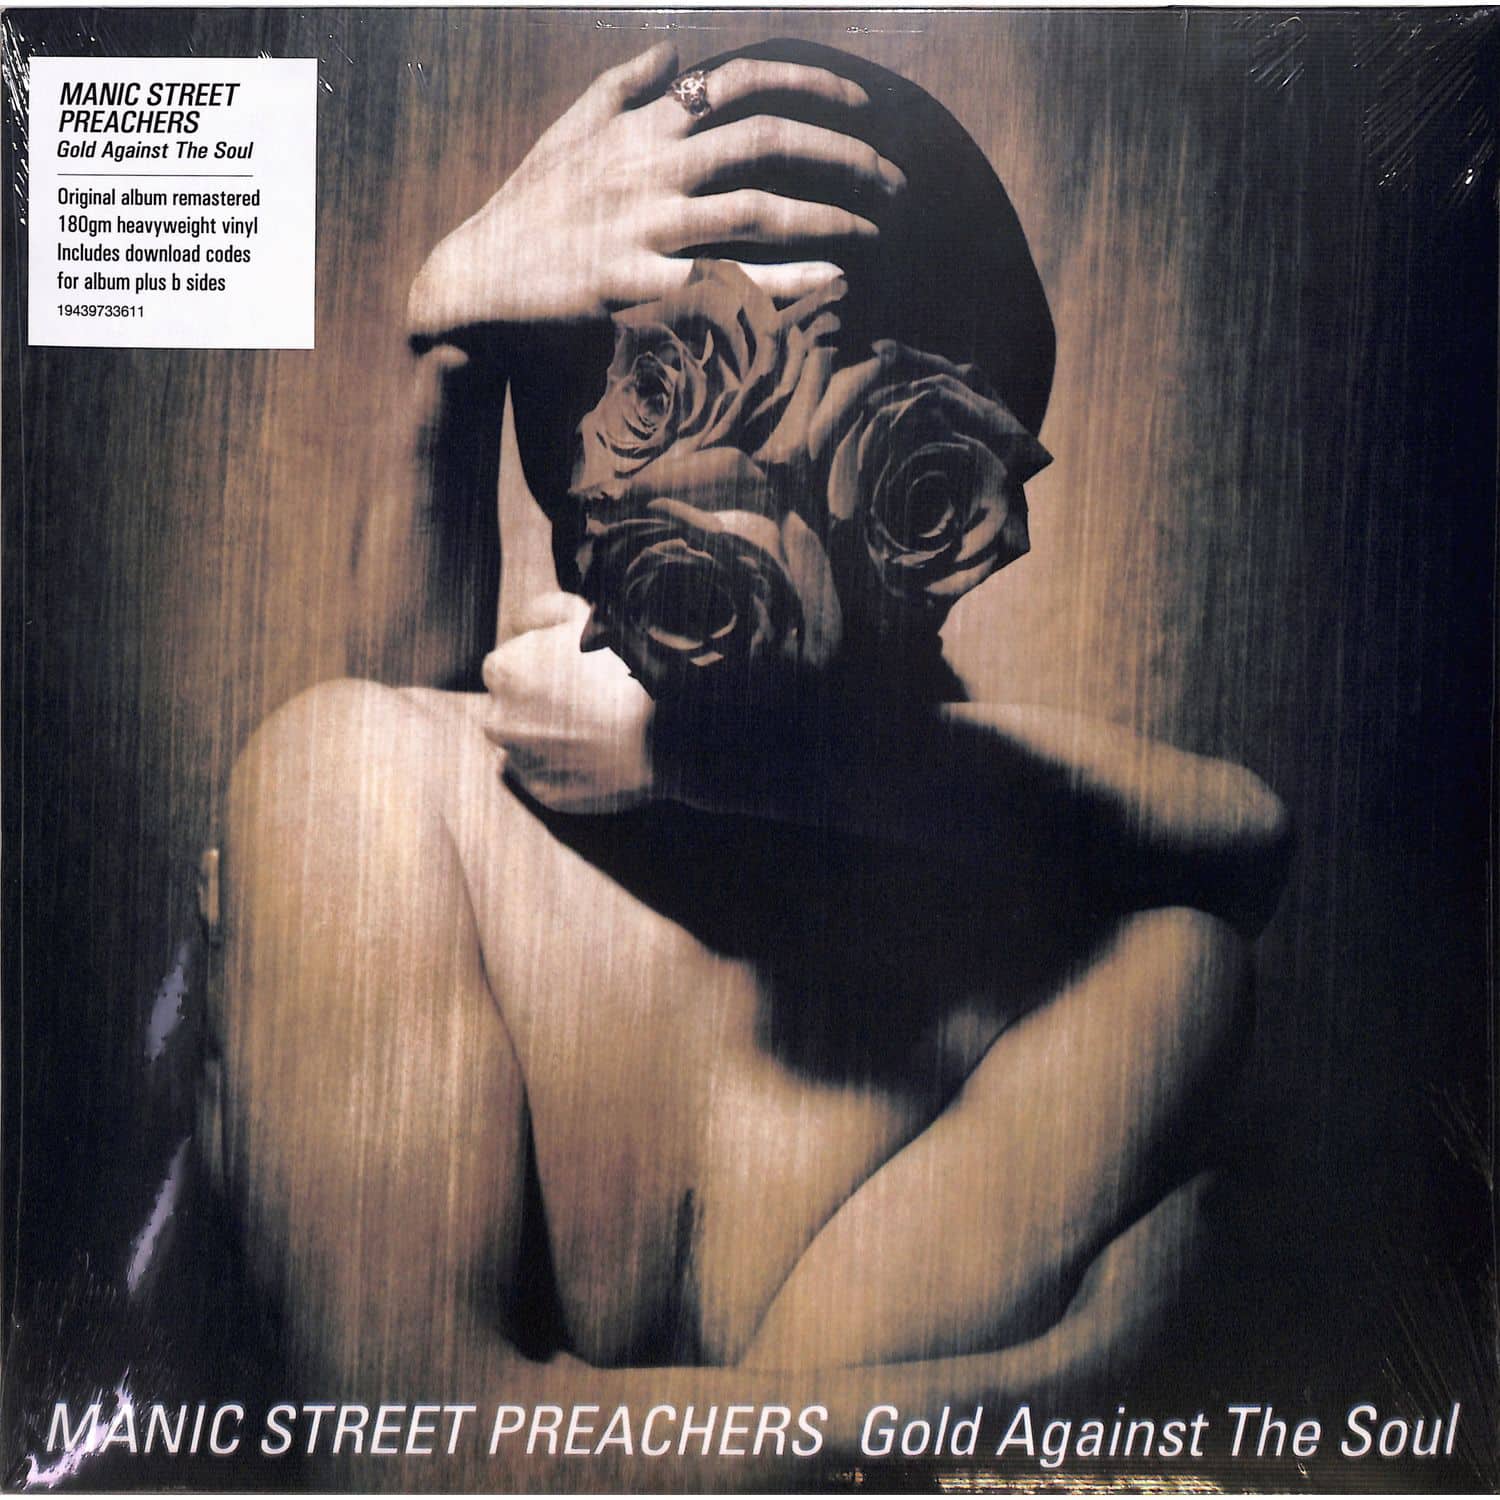 Manic Street Preachers - GOLD AGAINST THE SOUL 